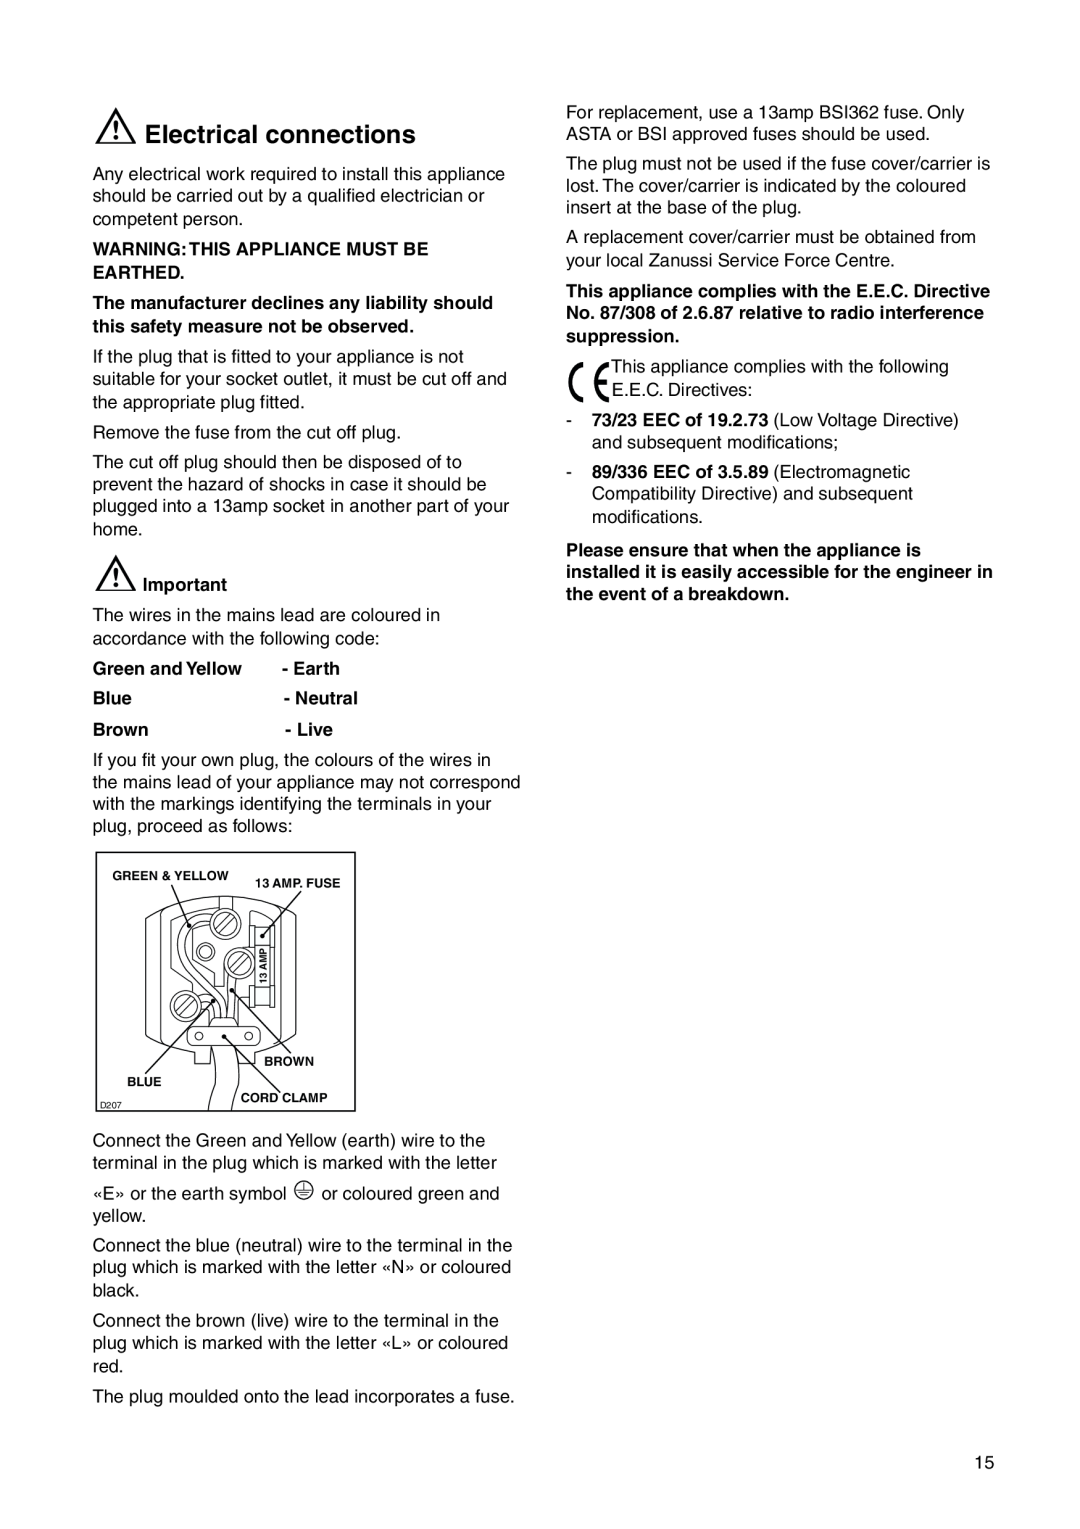 Zanussi ZI 920/9 KA manual Electrical connections, Warning This Appliance Must Be Earthed, Green and Yellow 